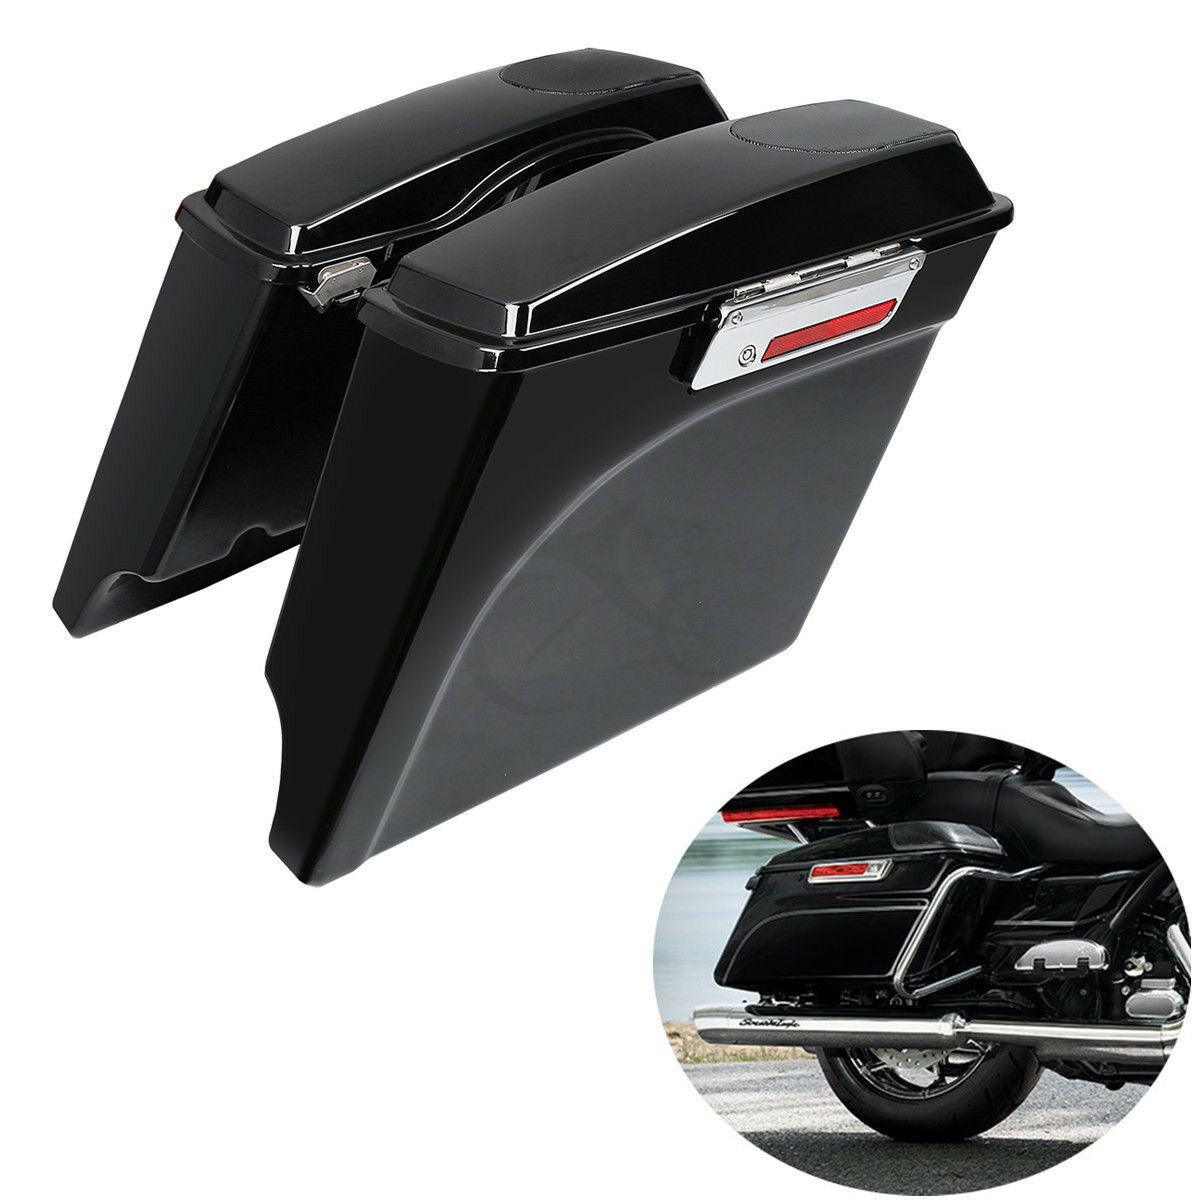 5" Stretched Extended Saddle Bags Saddlebags + Speakers For Harley Touring 93-13 - Moto Life Products